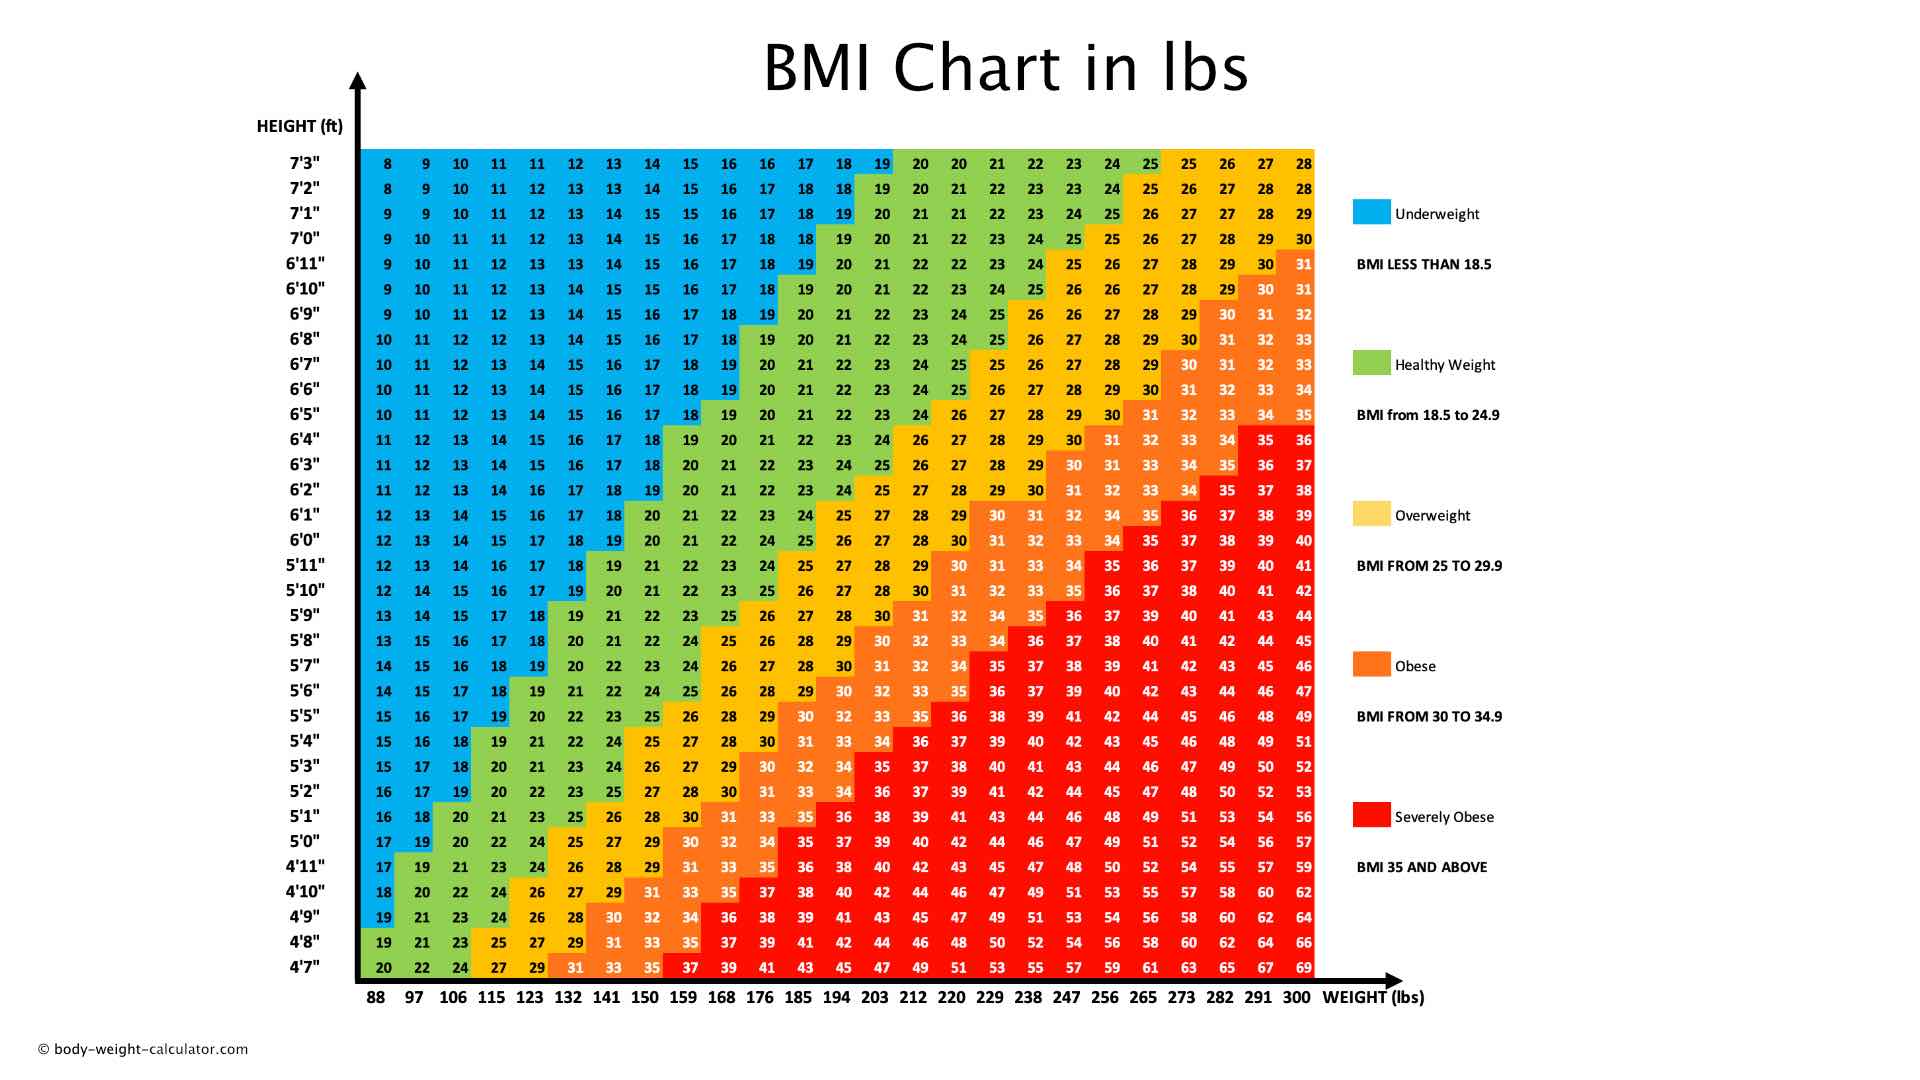 BMI chart for males by age in the United States - 2023